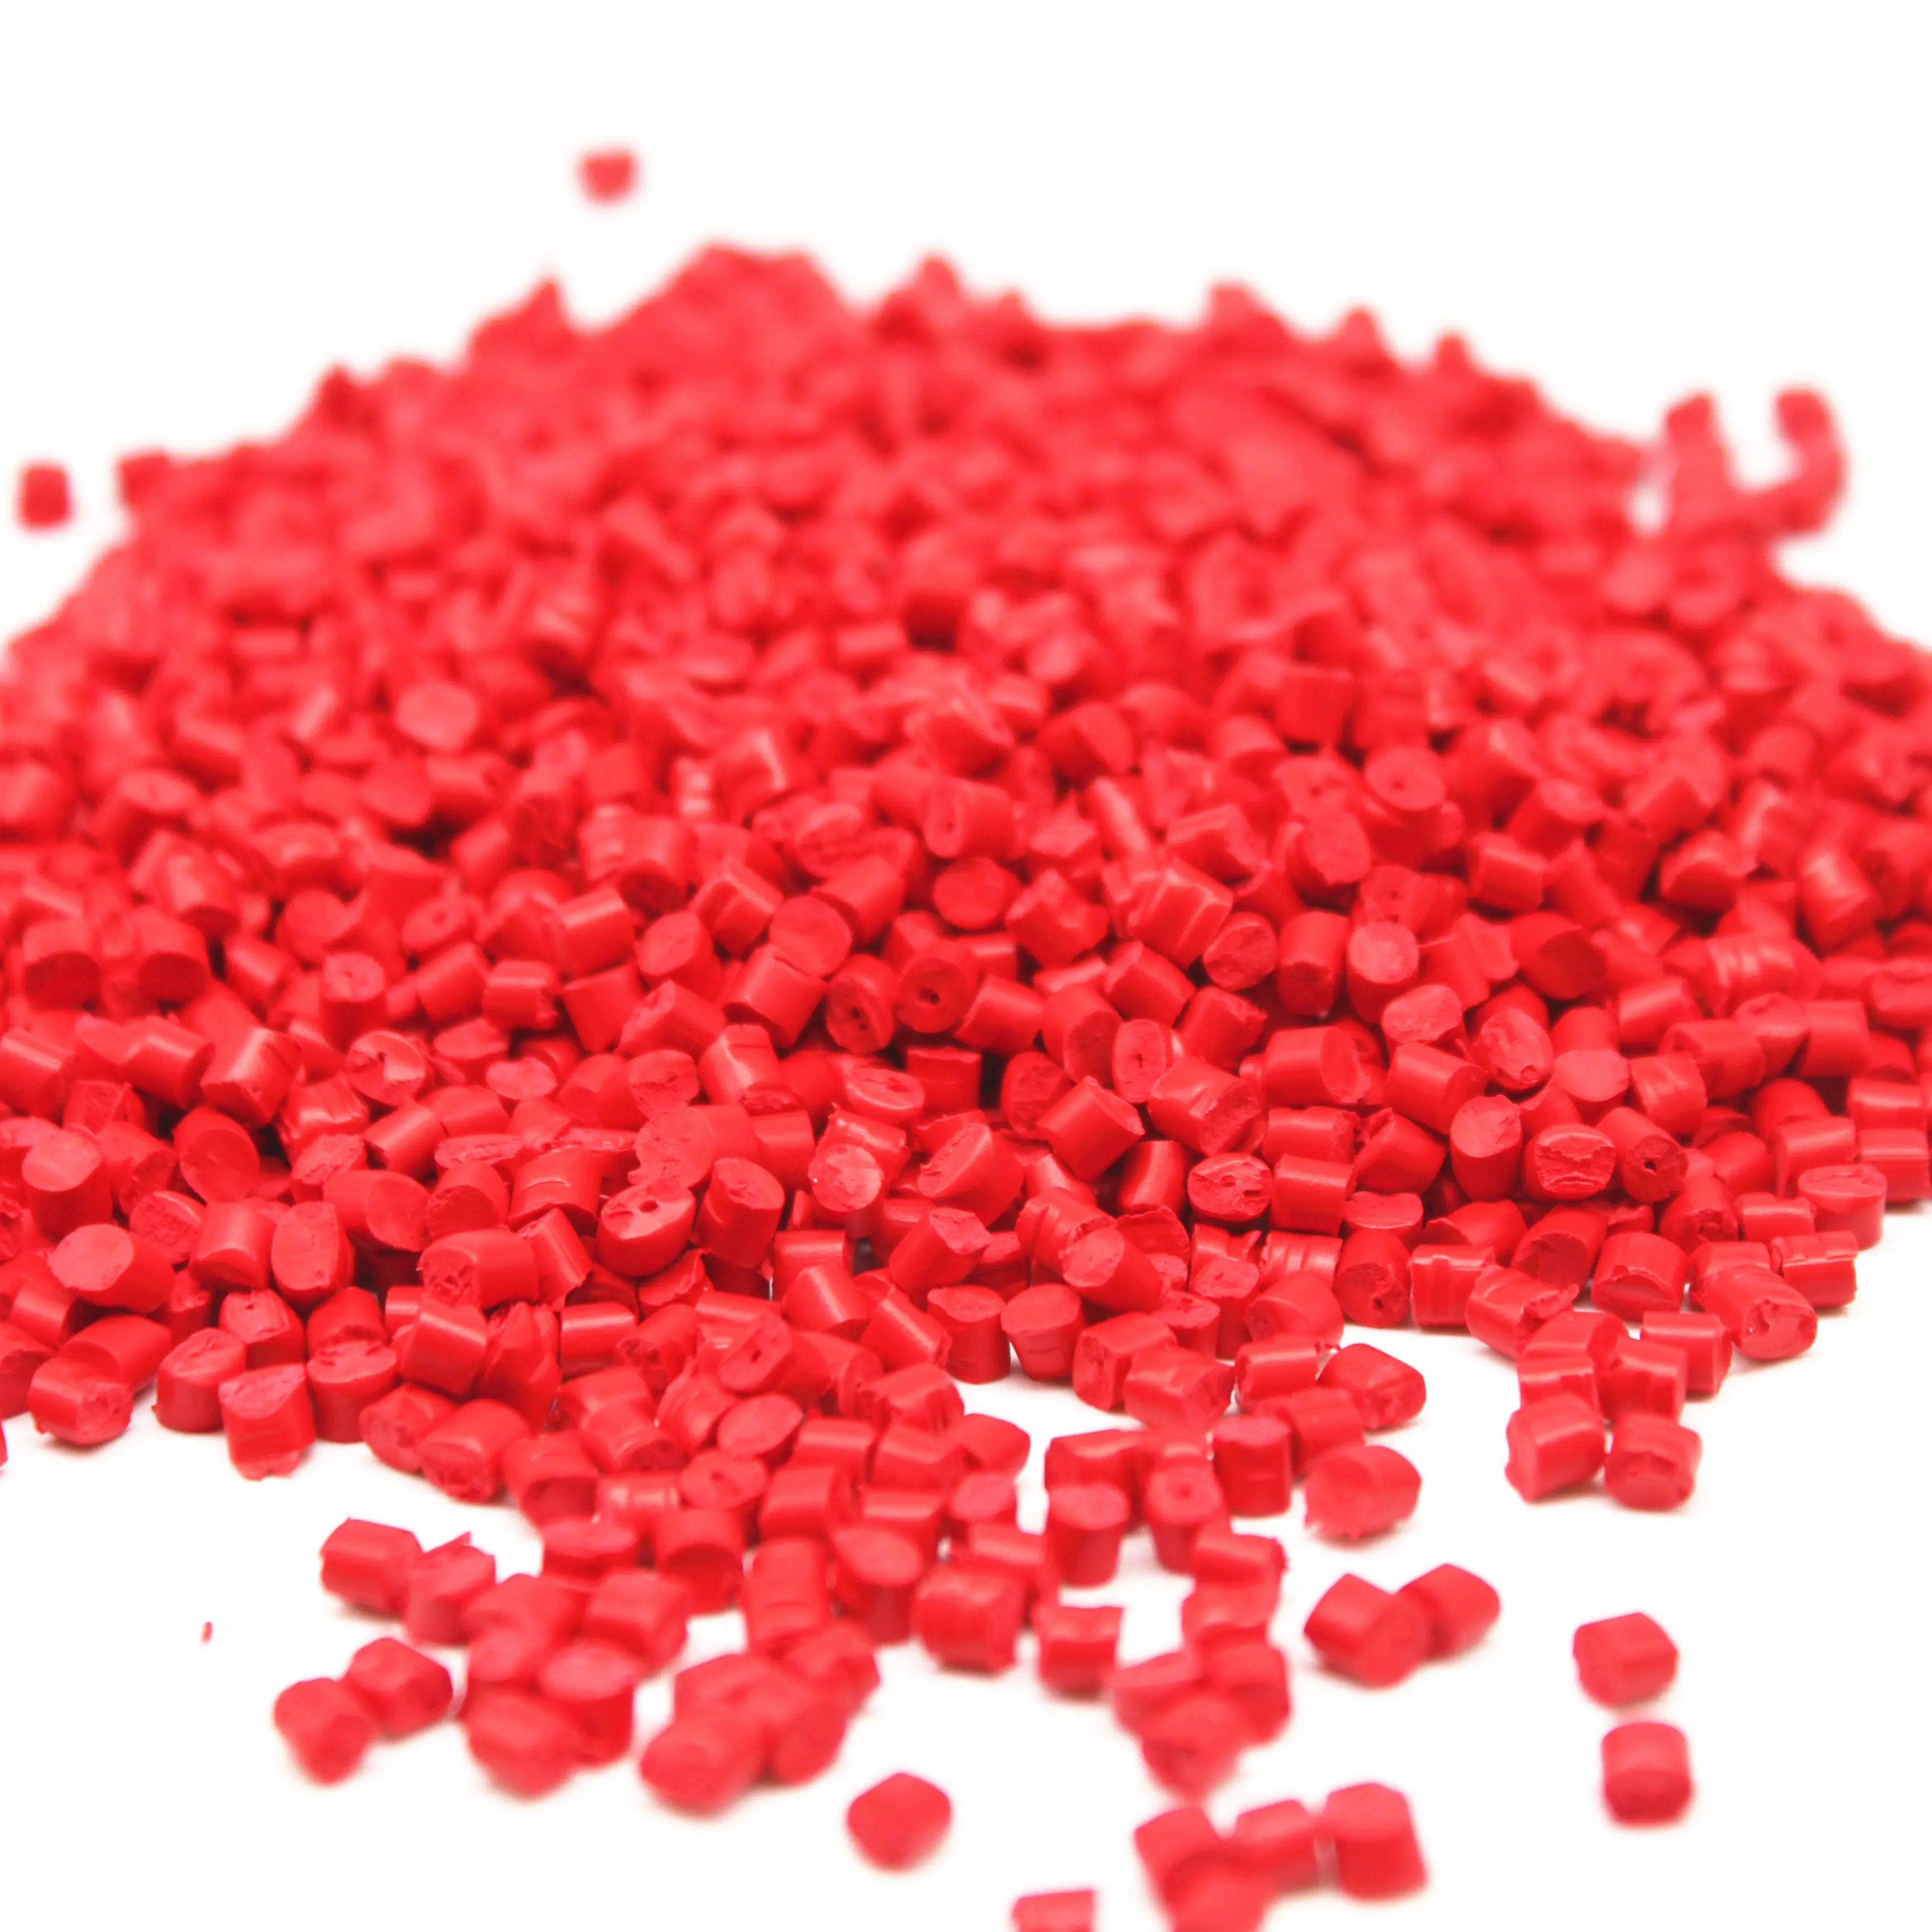 Agentable self small granule Appearance PE/PP/LLDPE/LDPE Red flame retardant Masterbatch/plastic masterbatches